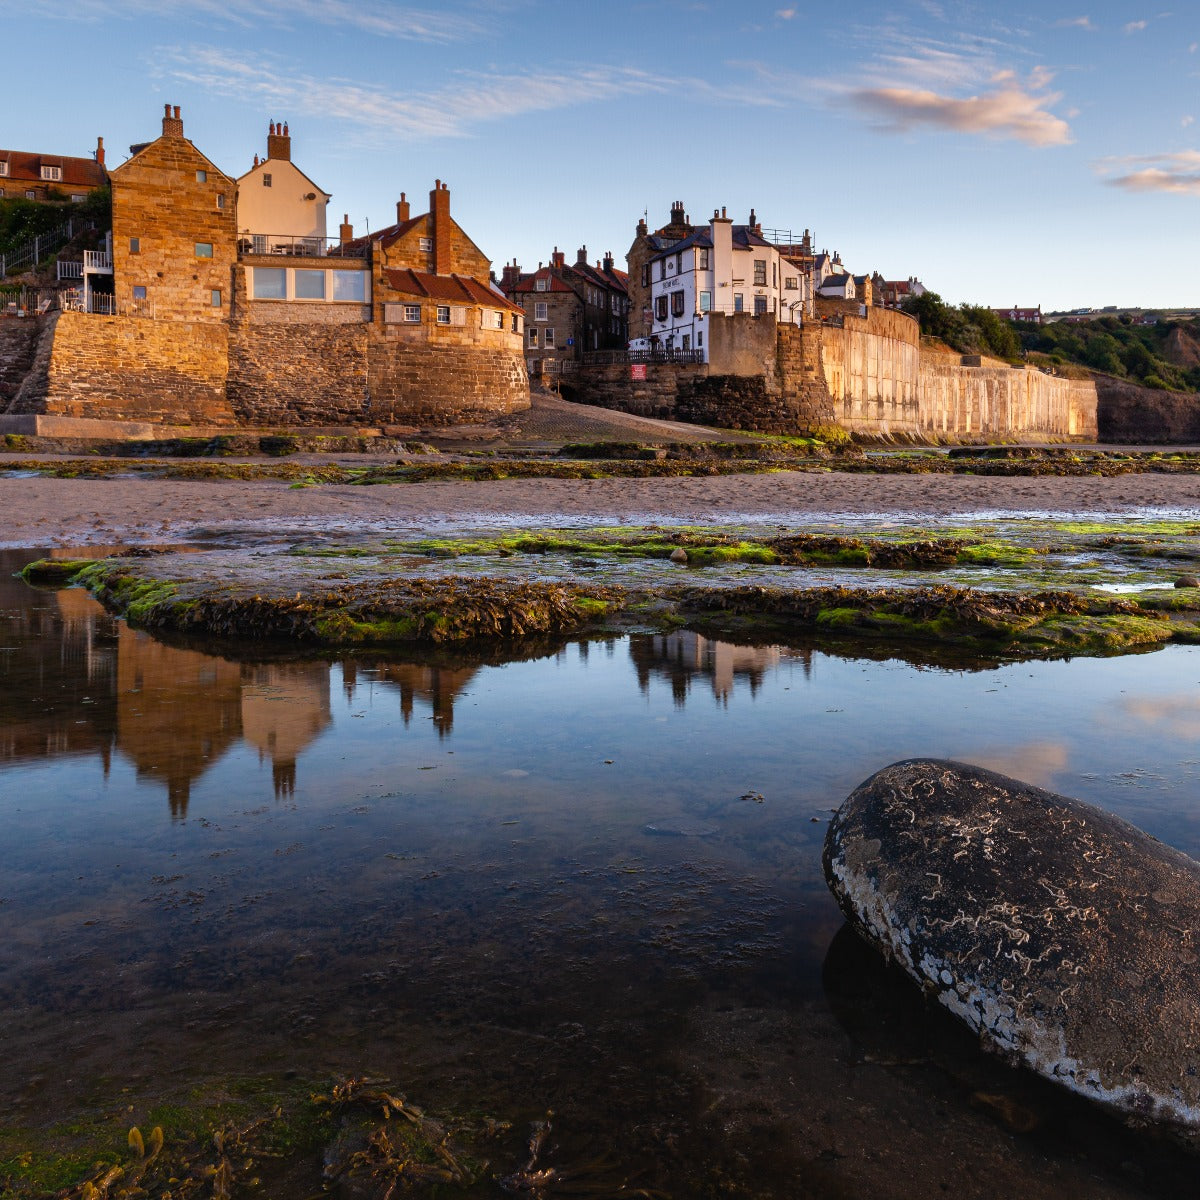 The village of Robin Hood's Bay from the beach